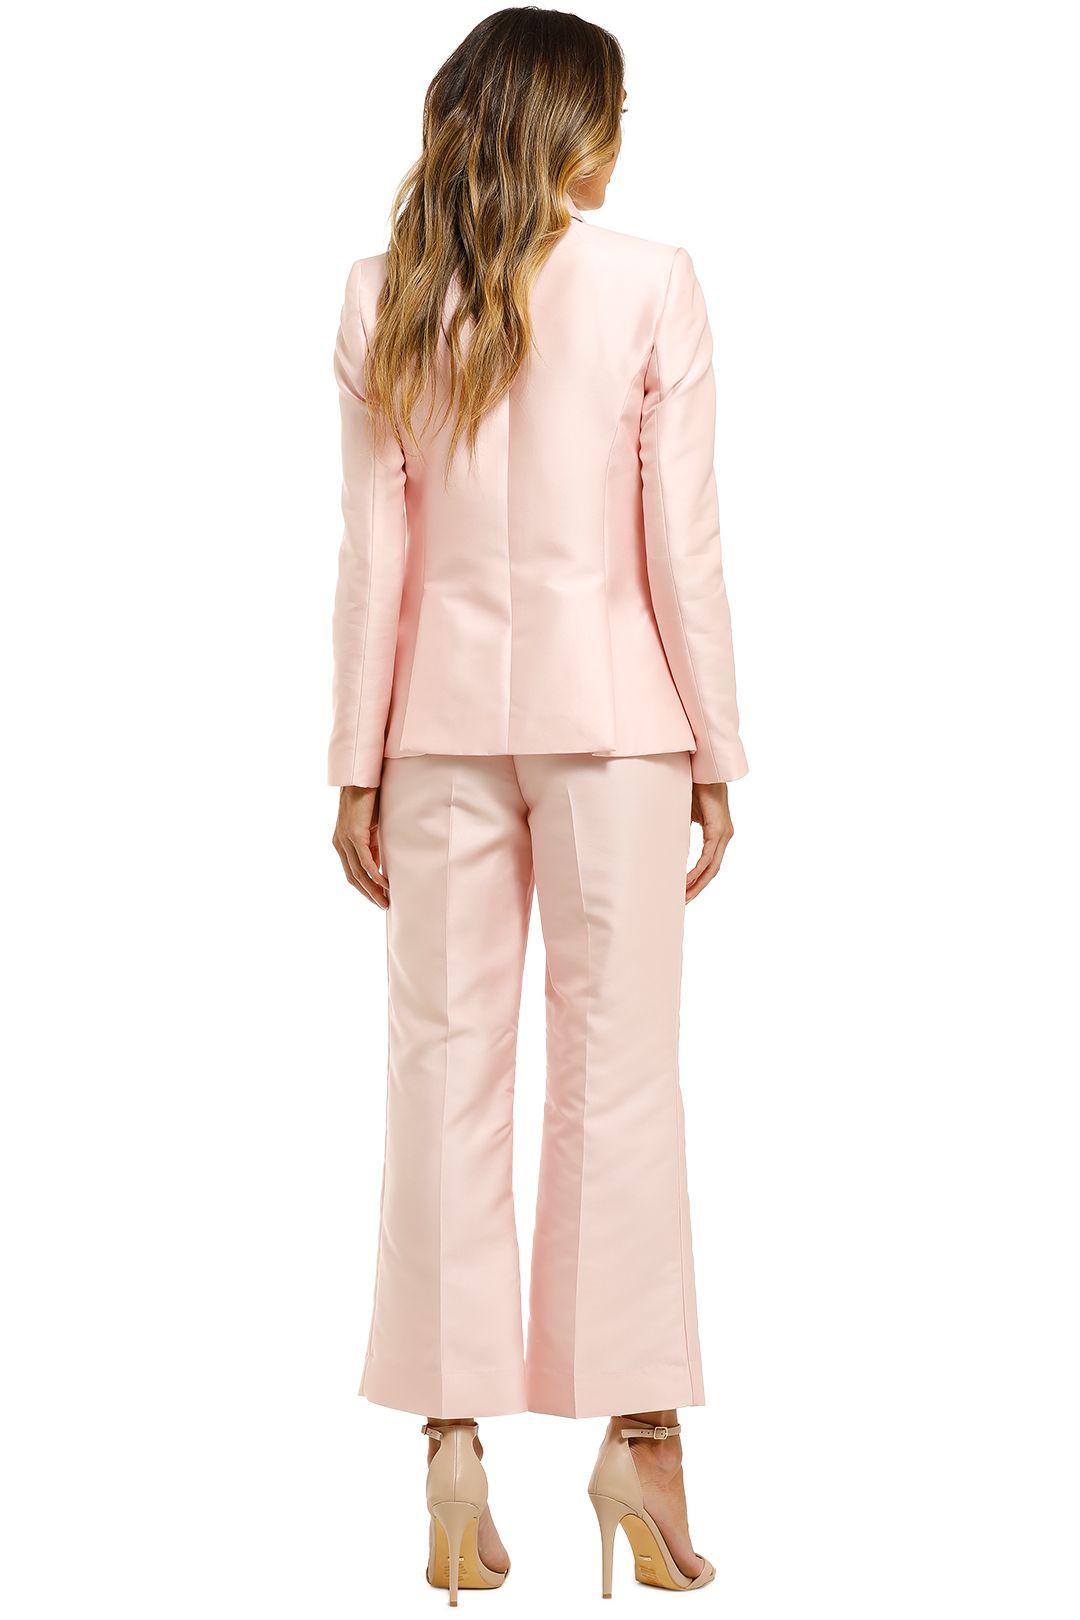 Thurley-Bianca-Tailored-Blazer-And-Pant-Set-Back